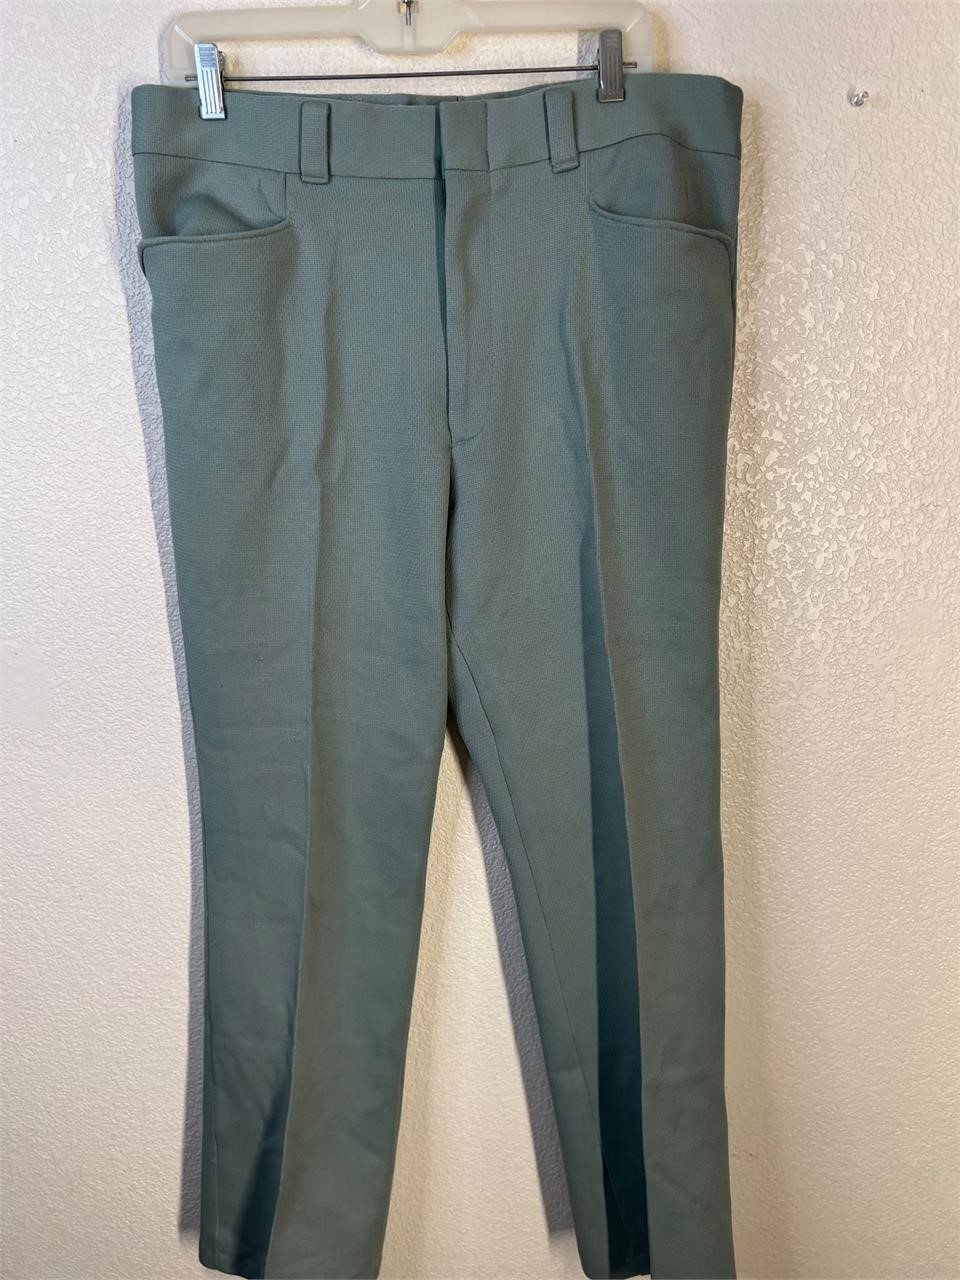 Vintage Muted Green Trouser Pants 36” waist